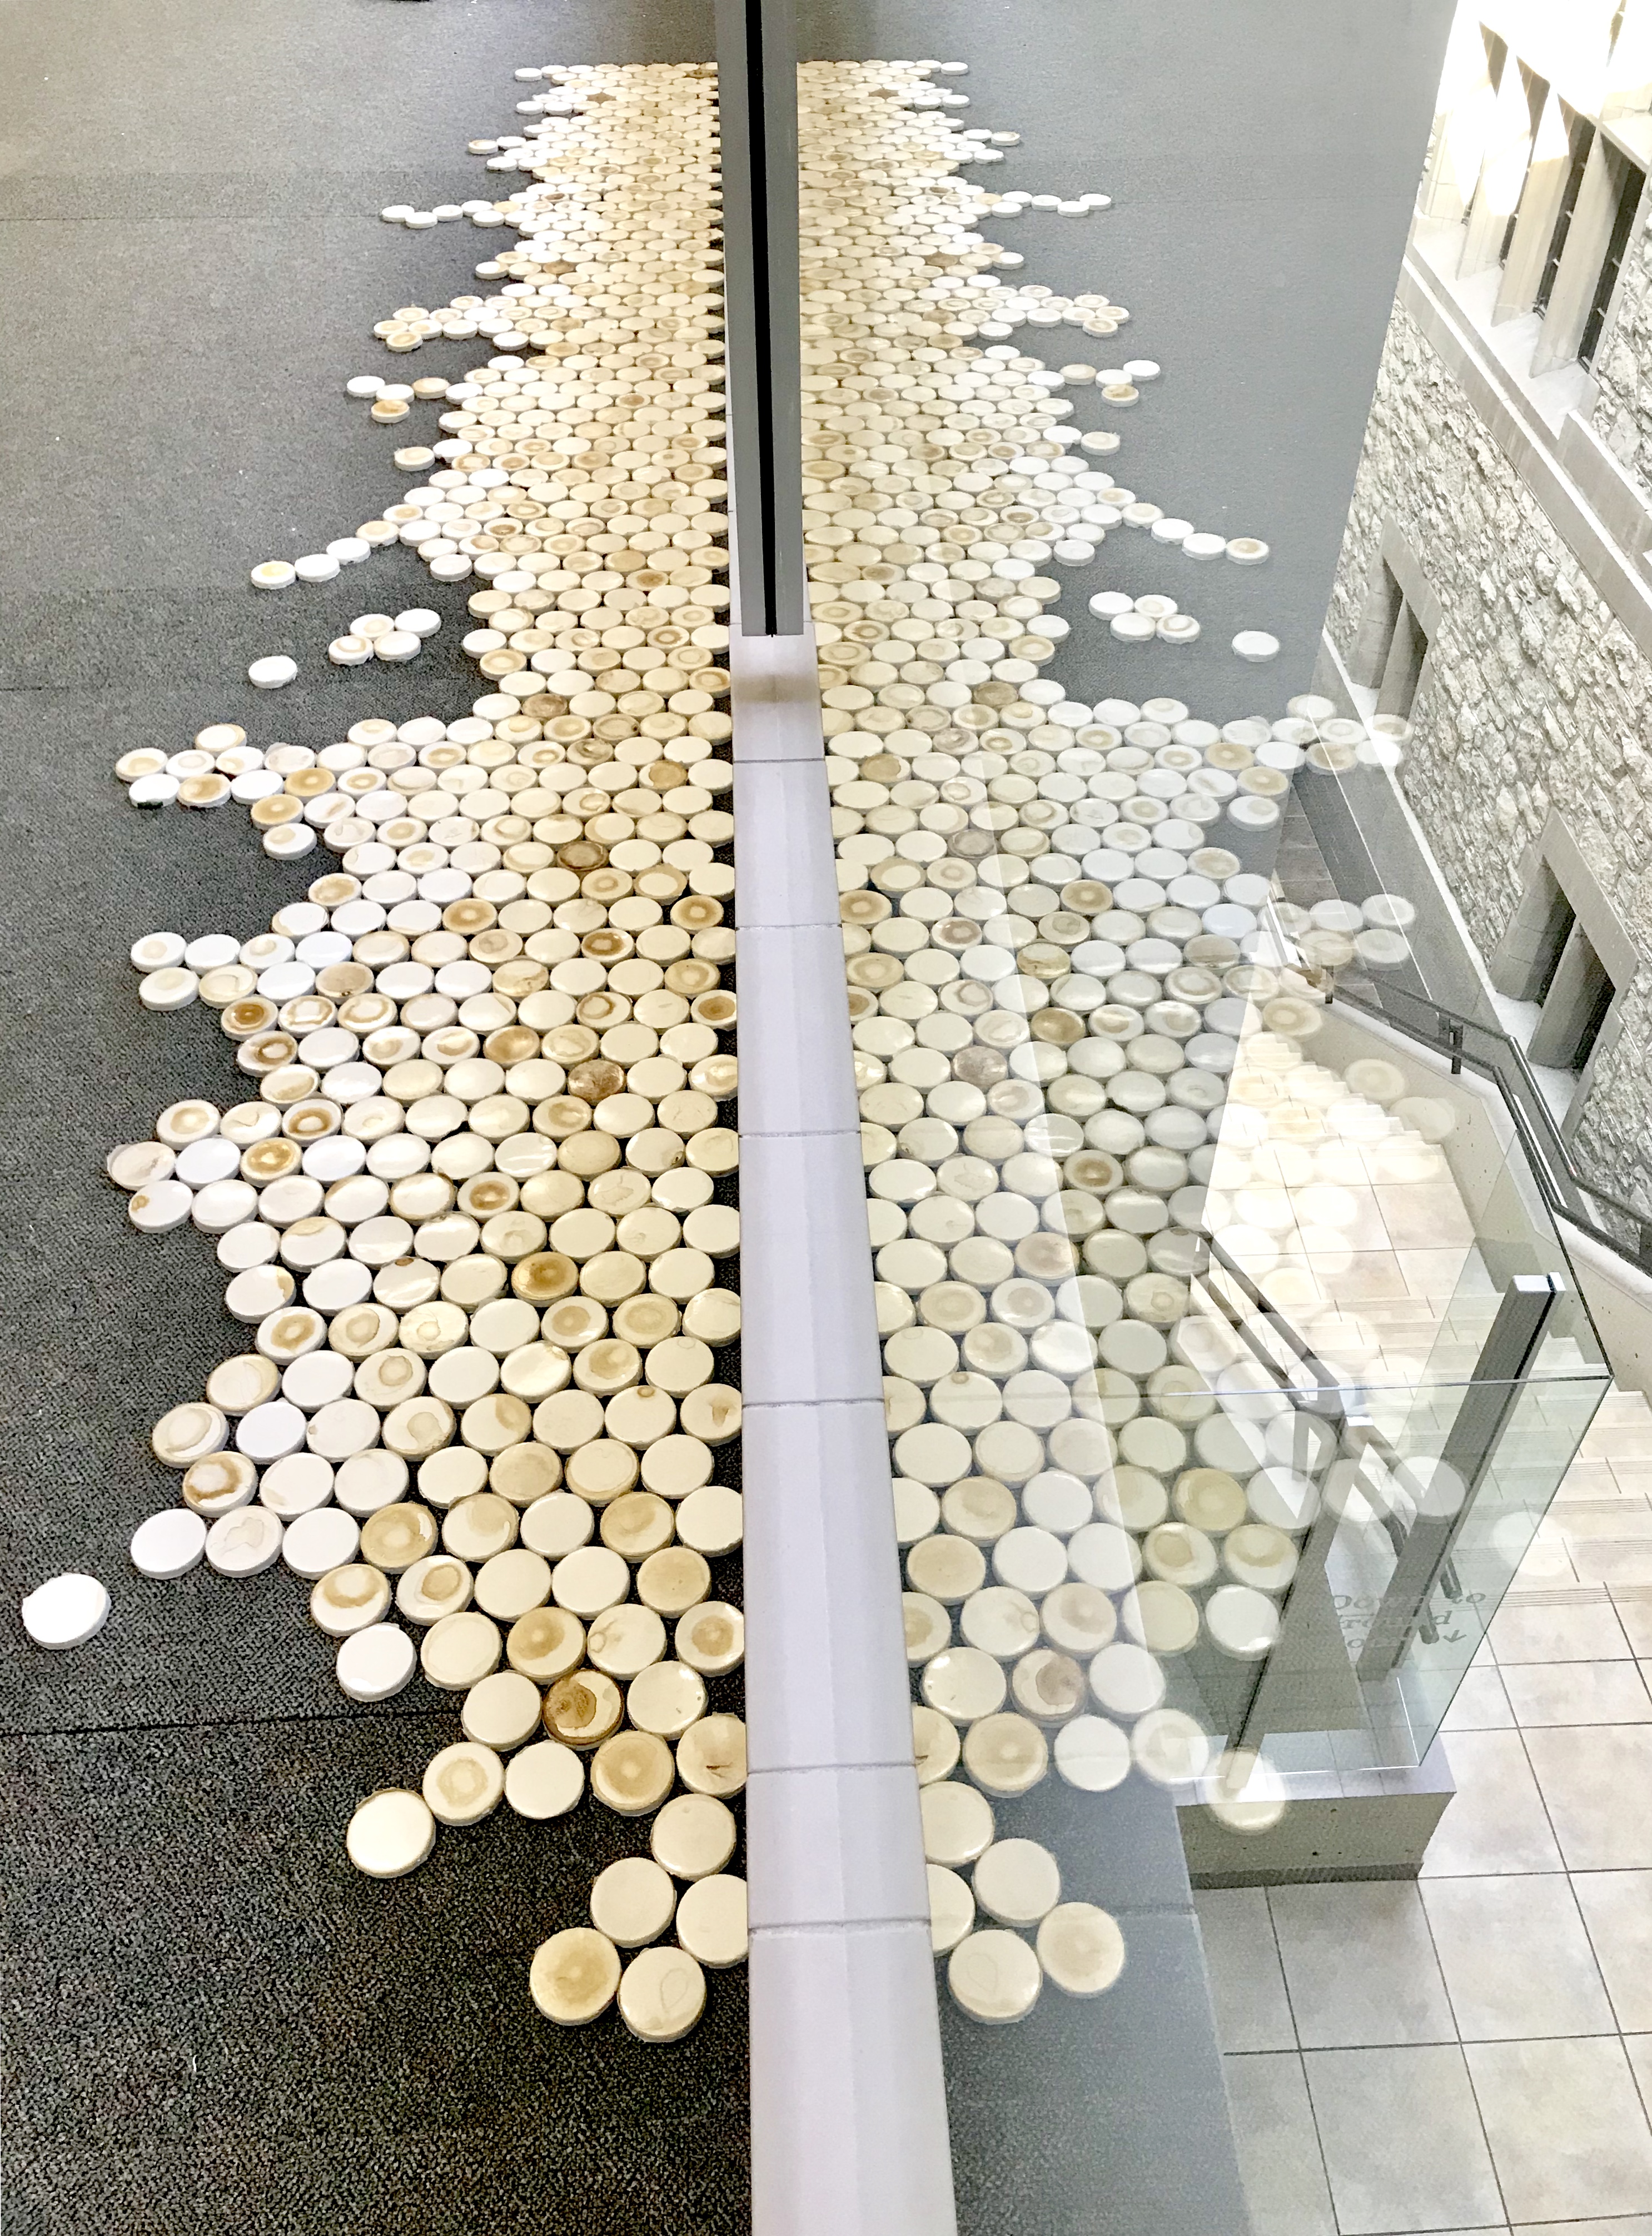 A mosaic of coffee cup lids created for ARTCycled 2018 by E Haffermehl